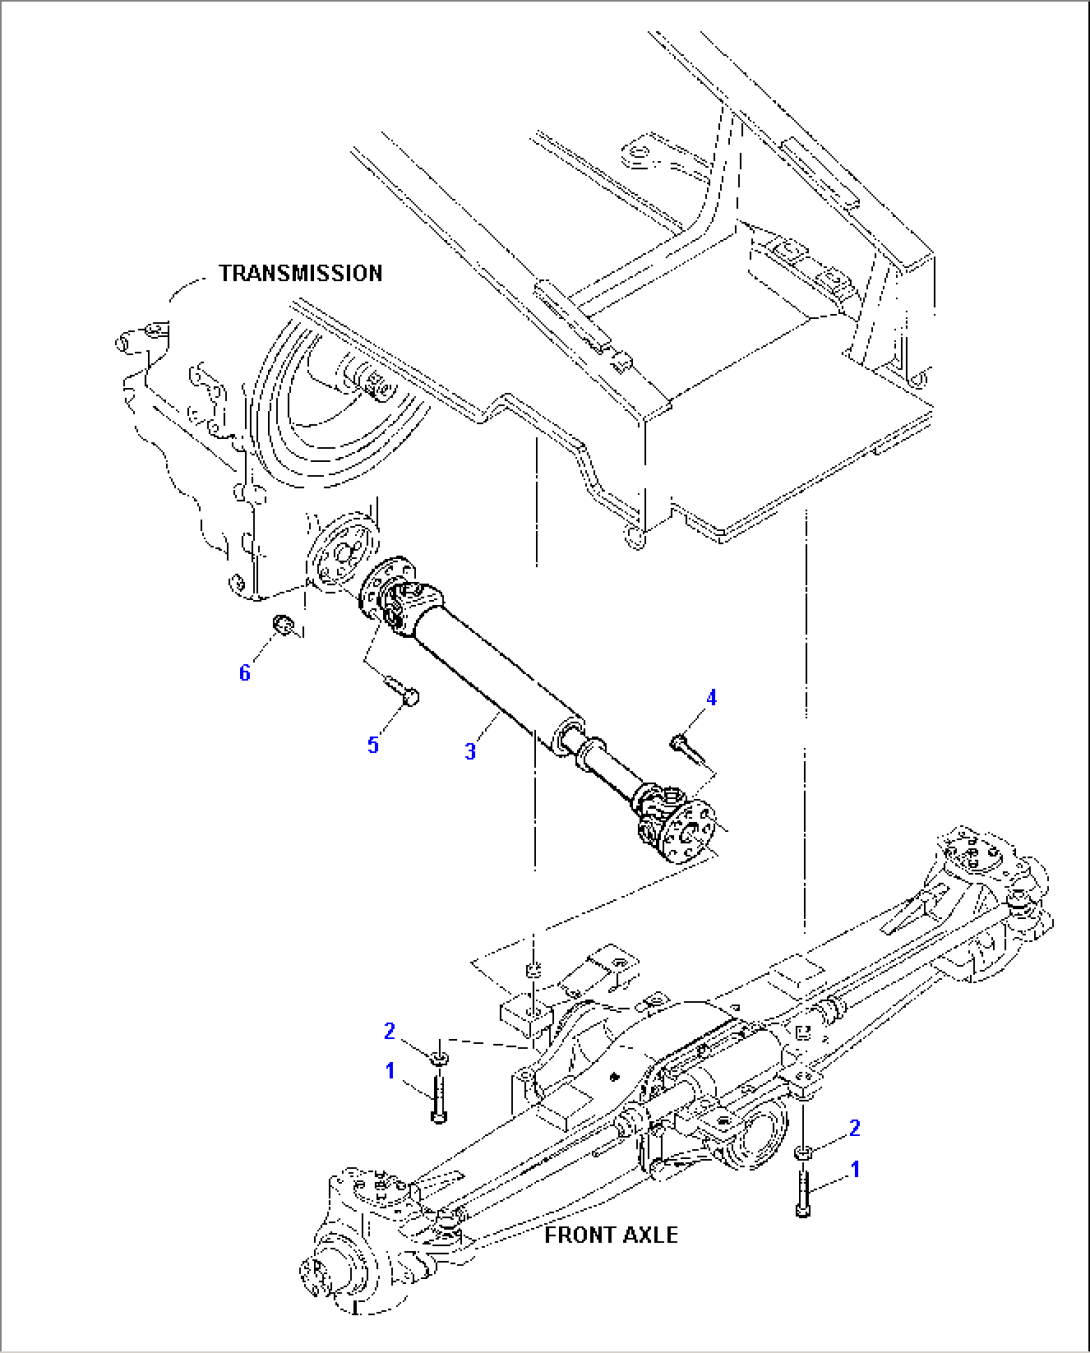 FRONT PROPELLER SHAFT AND FRONT AXLE FIXING